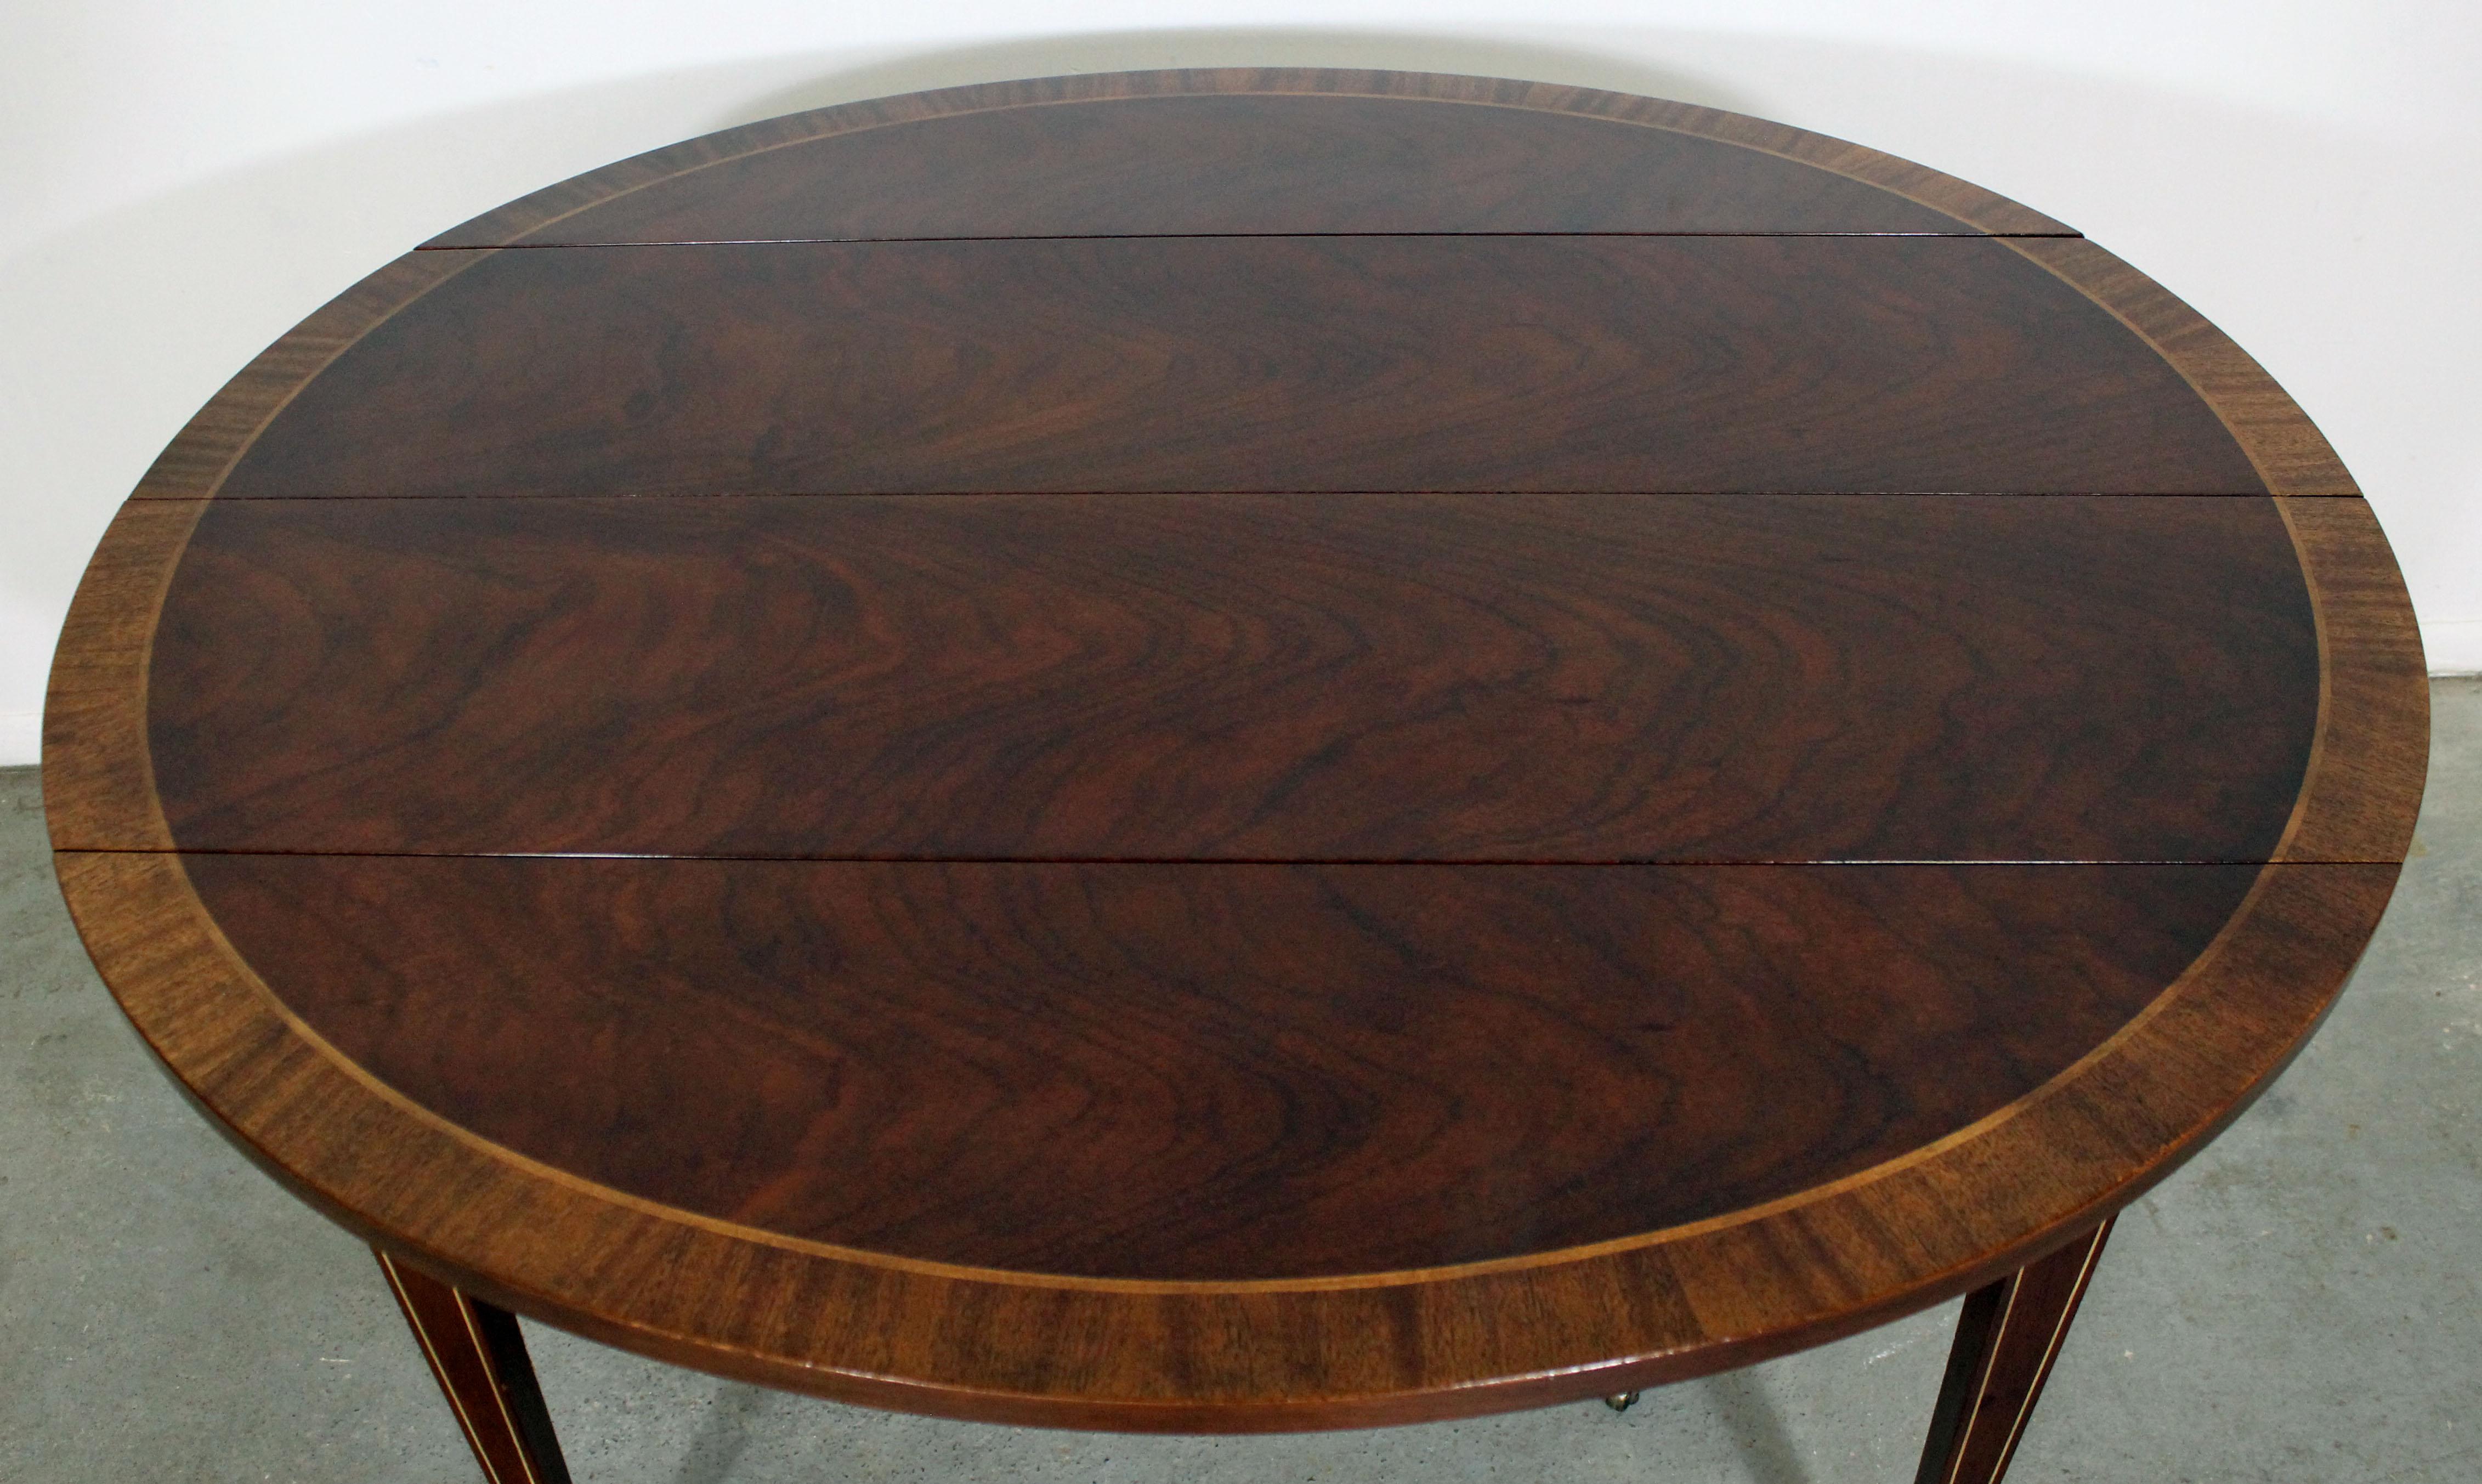 Offered is a Baker Federal style banded mahogany expansion dining table. The table has 3 boards. It's a great space saving table as it can be used round as well. The table is signed Baker. The table is in great condition, showing some wear from age